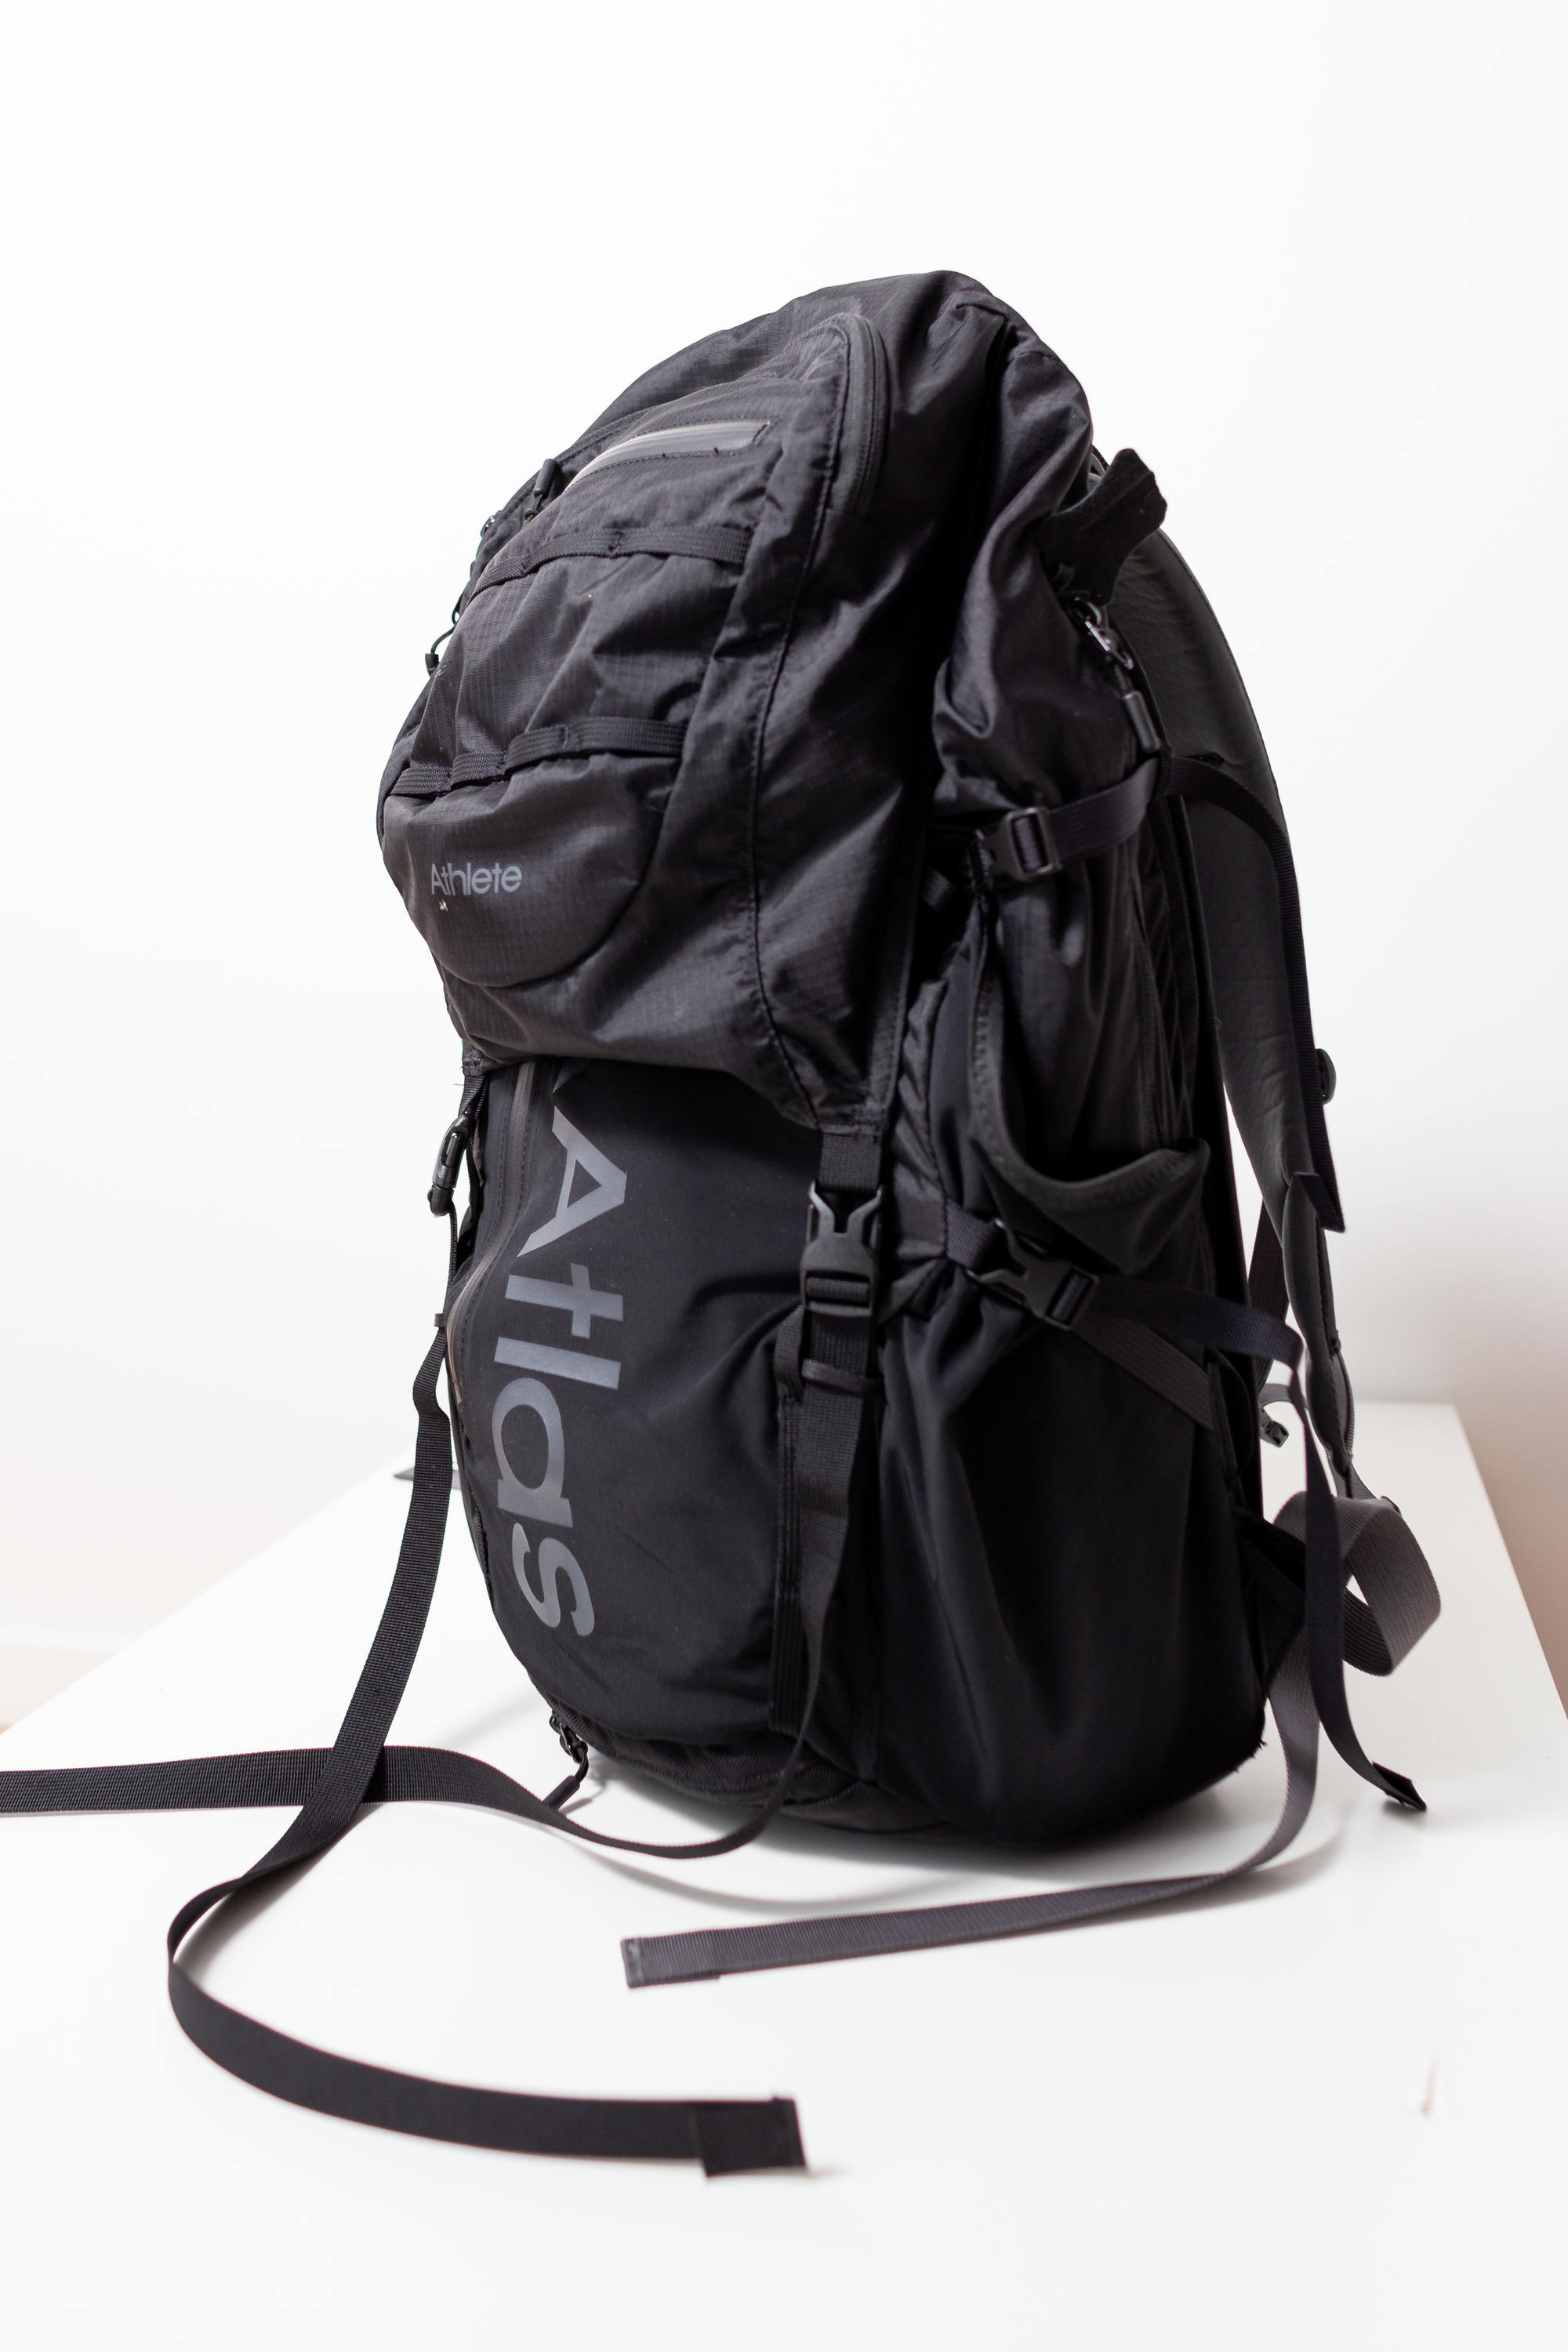 camera-backpack-review-atlas-athlete-01